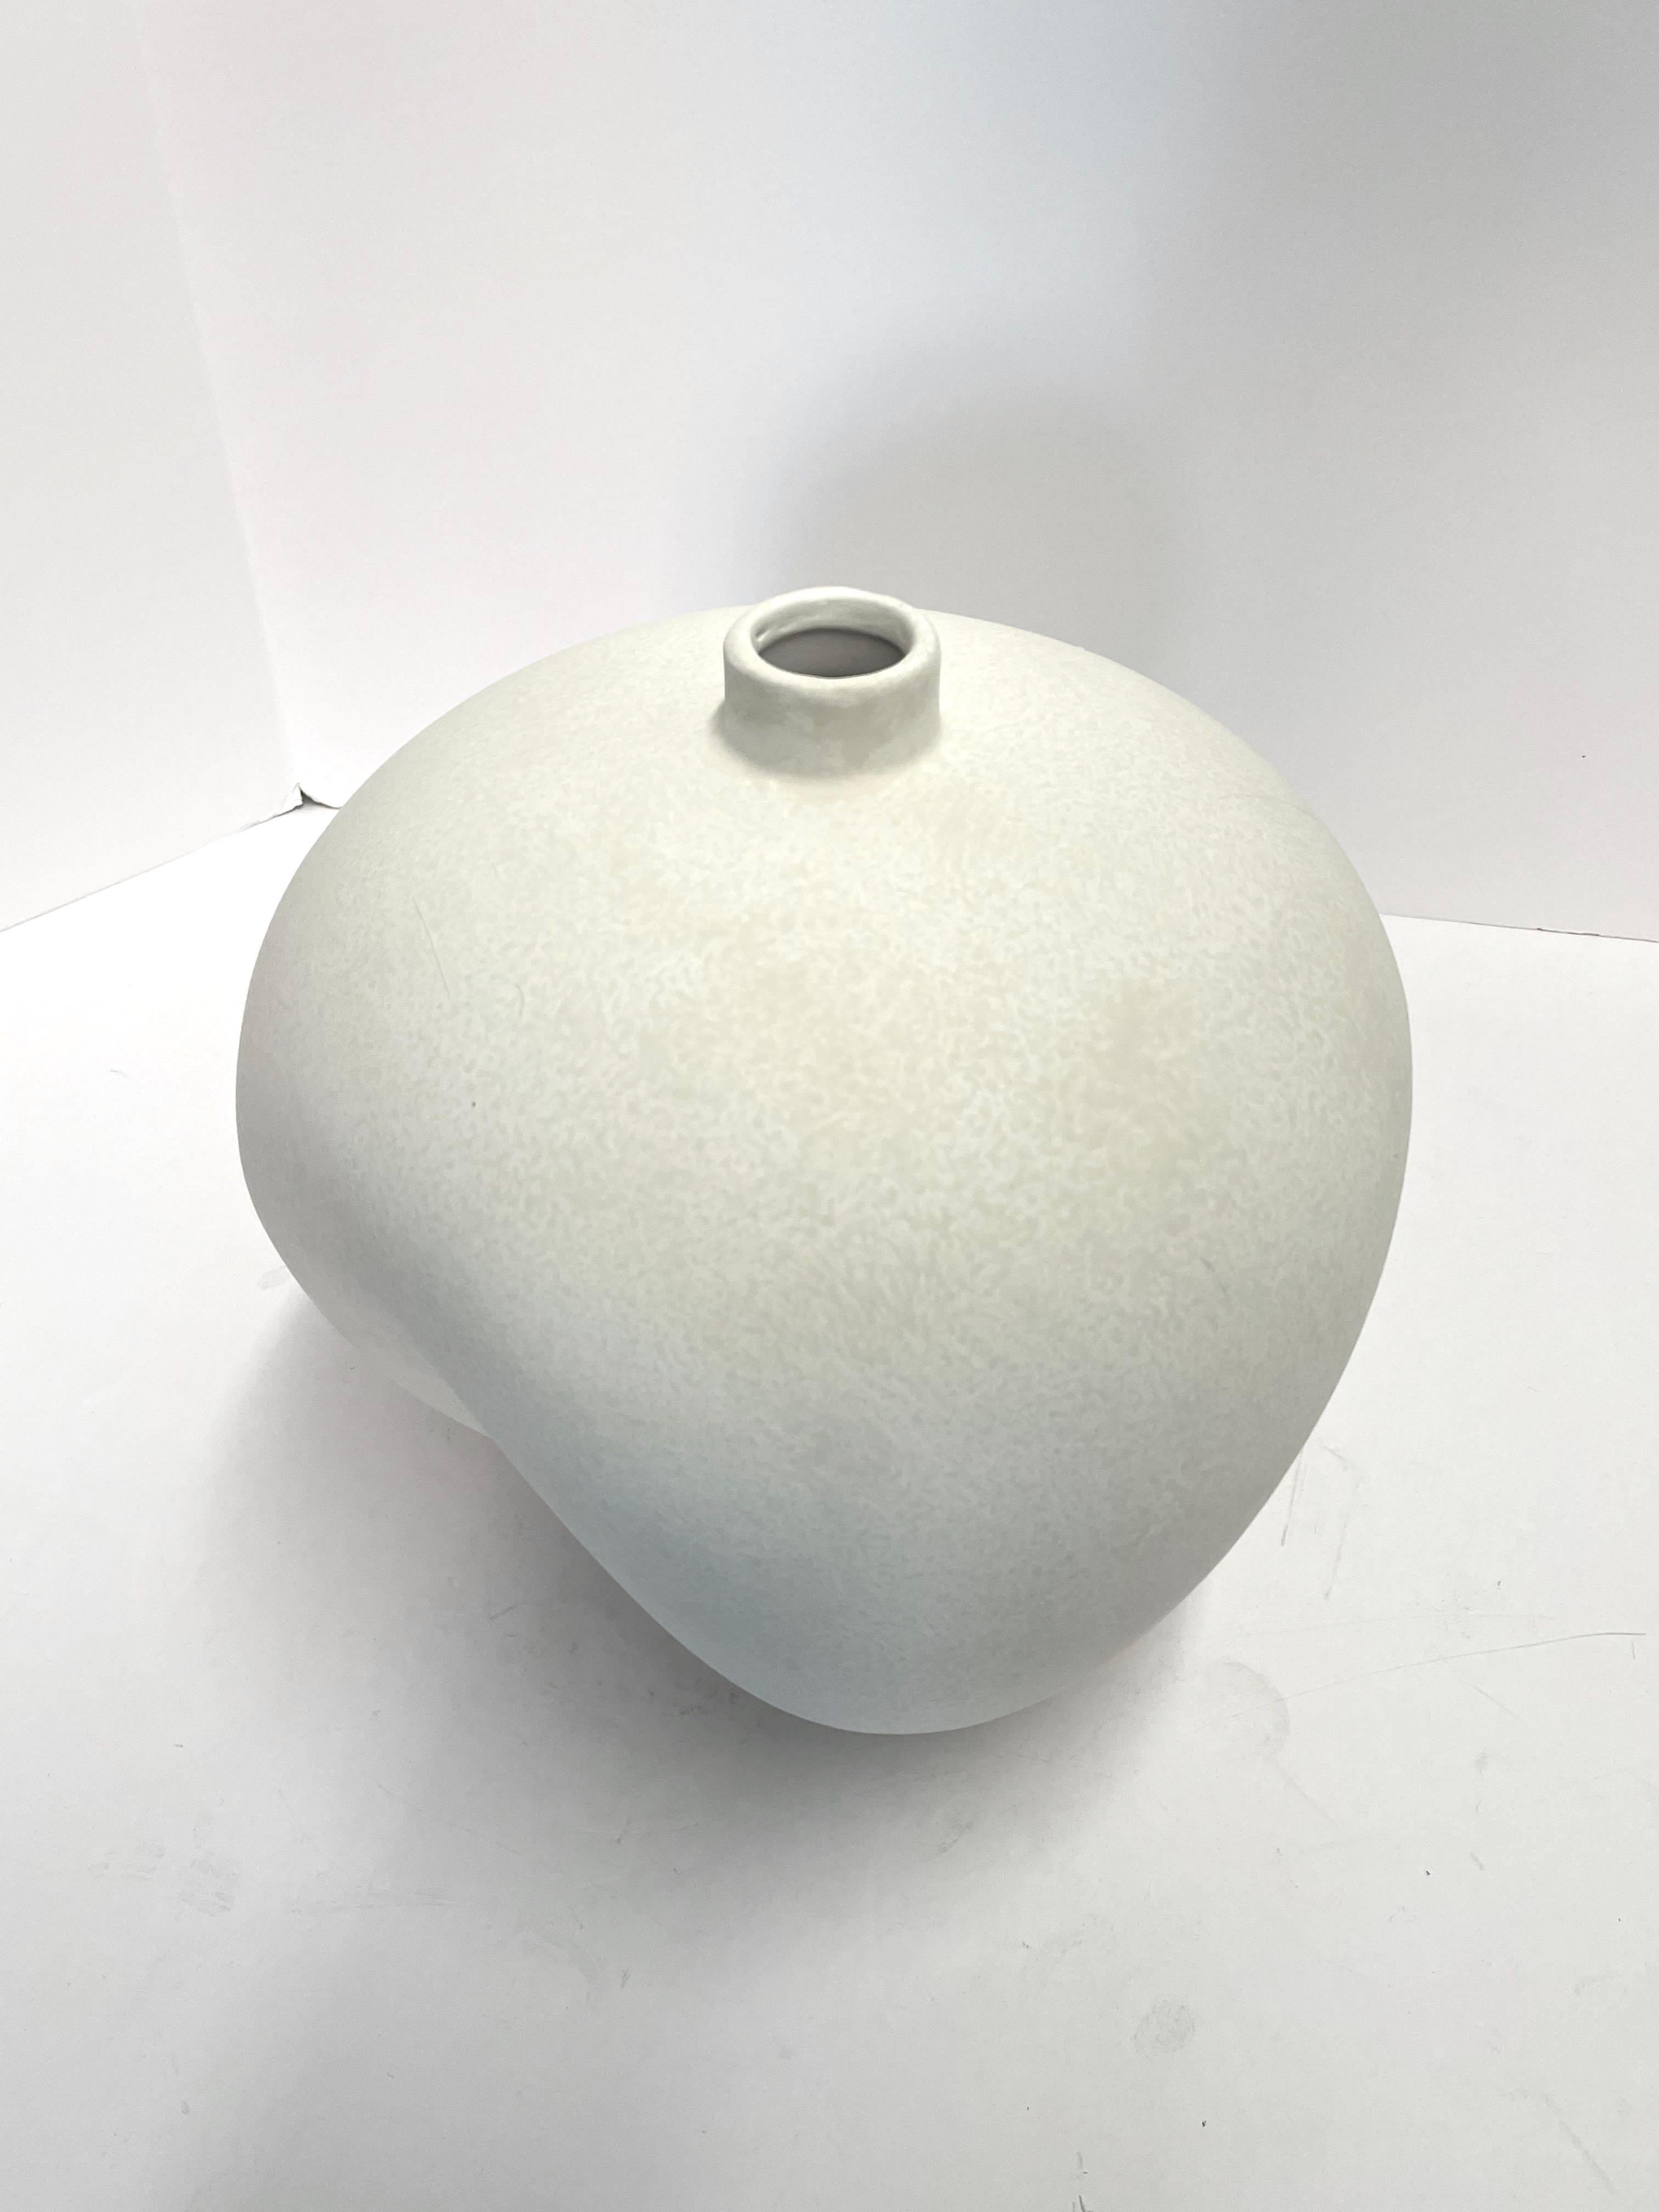 Contemporary Danish design mini size apple shaped vase in white glaze finish.
Tubular spout opening.
Available in two other sizes (S5893 and S5894).